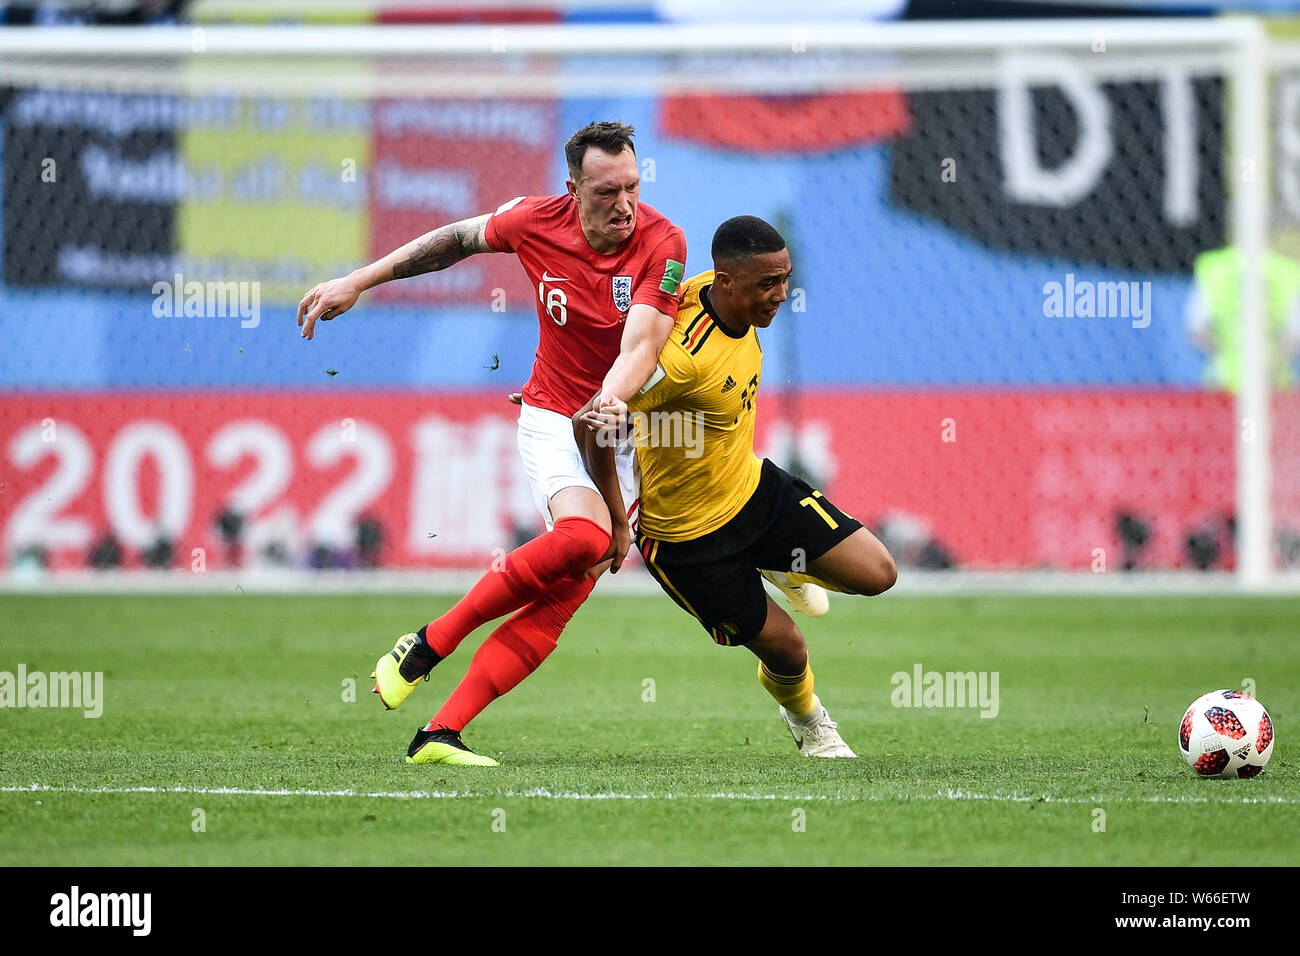 Youri Tielemans of Belgium, right, challenges Phil Jones of England in their third place match during the 2018 FIFA World Cup in Saint Petersburg, Rus Stock Photo